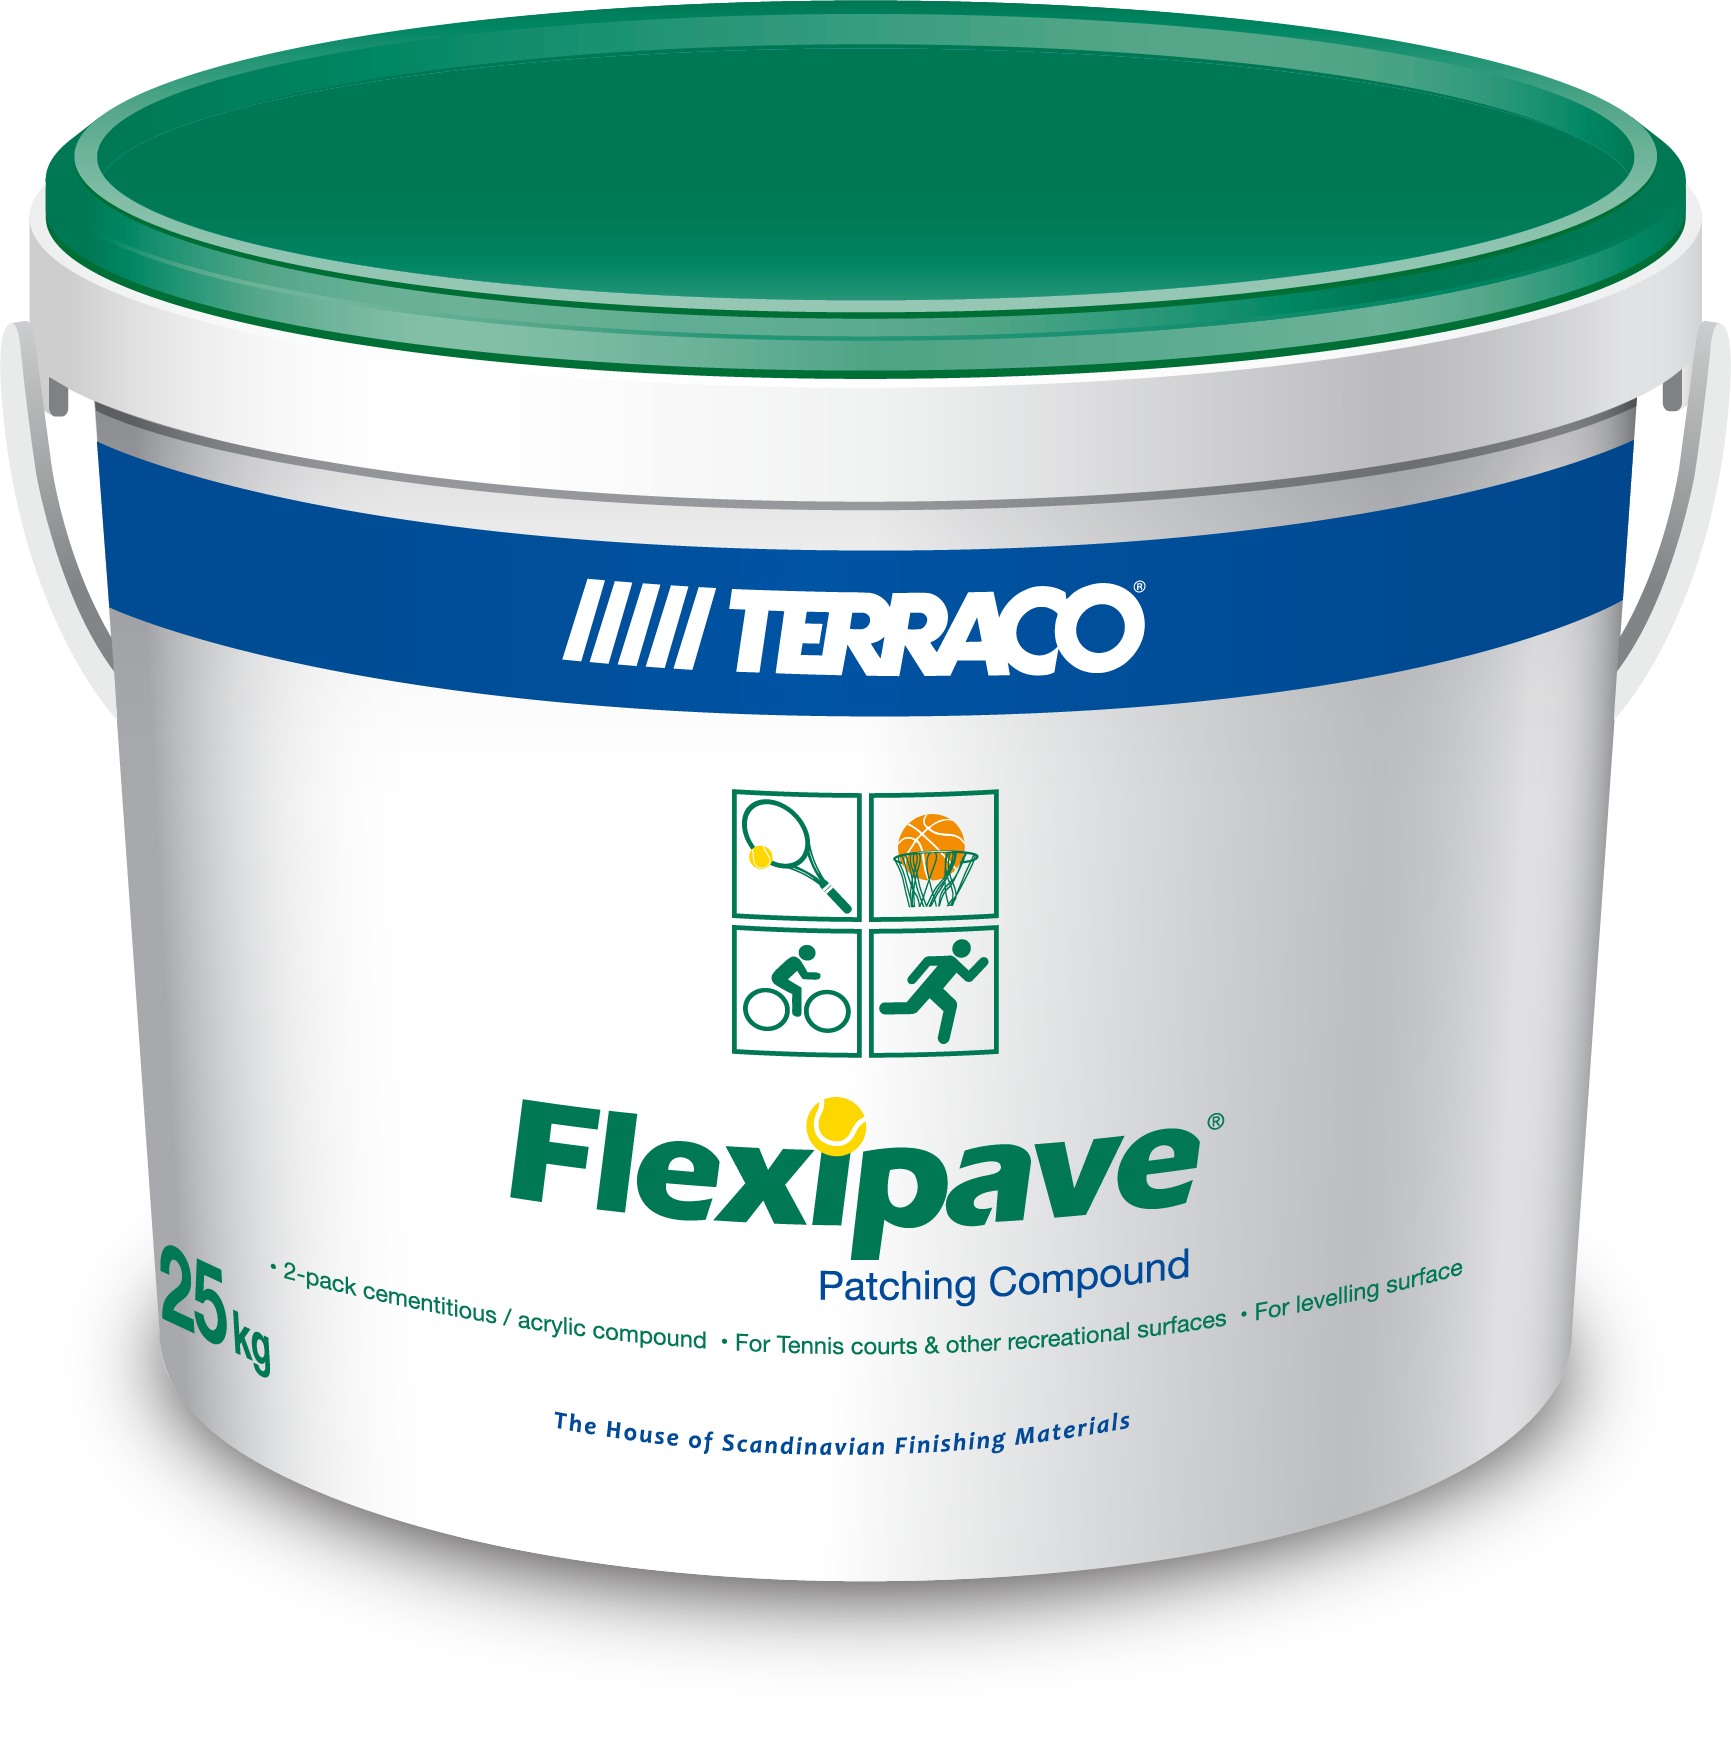 Flexipave Patching Compound